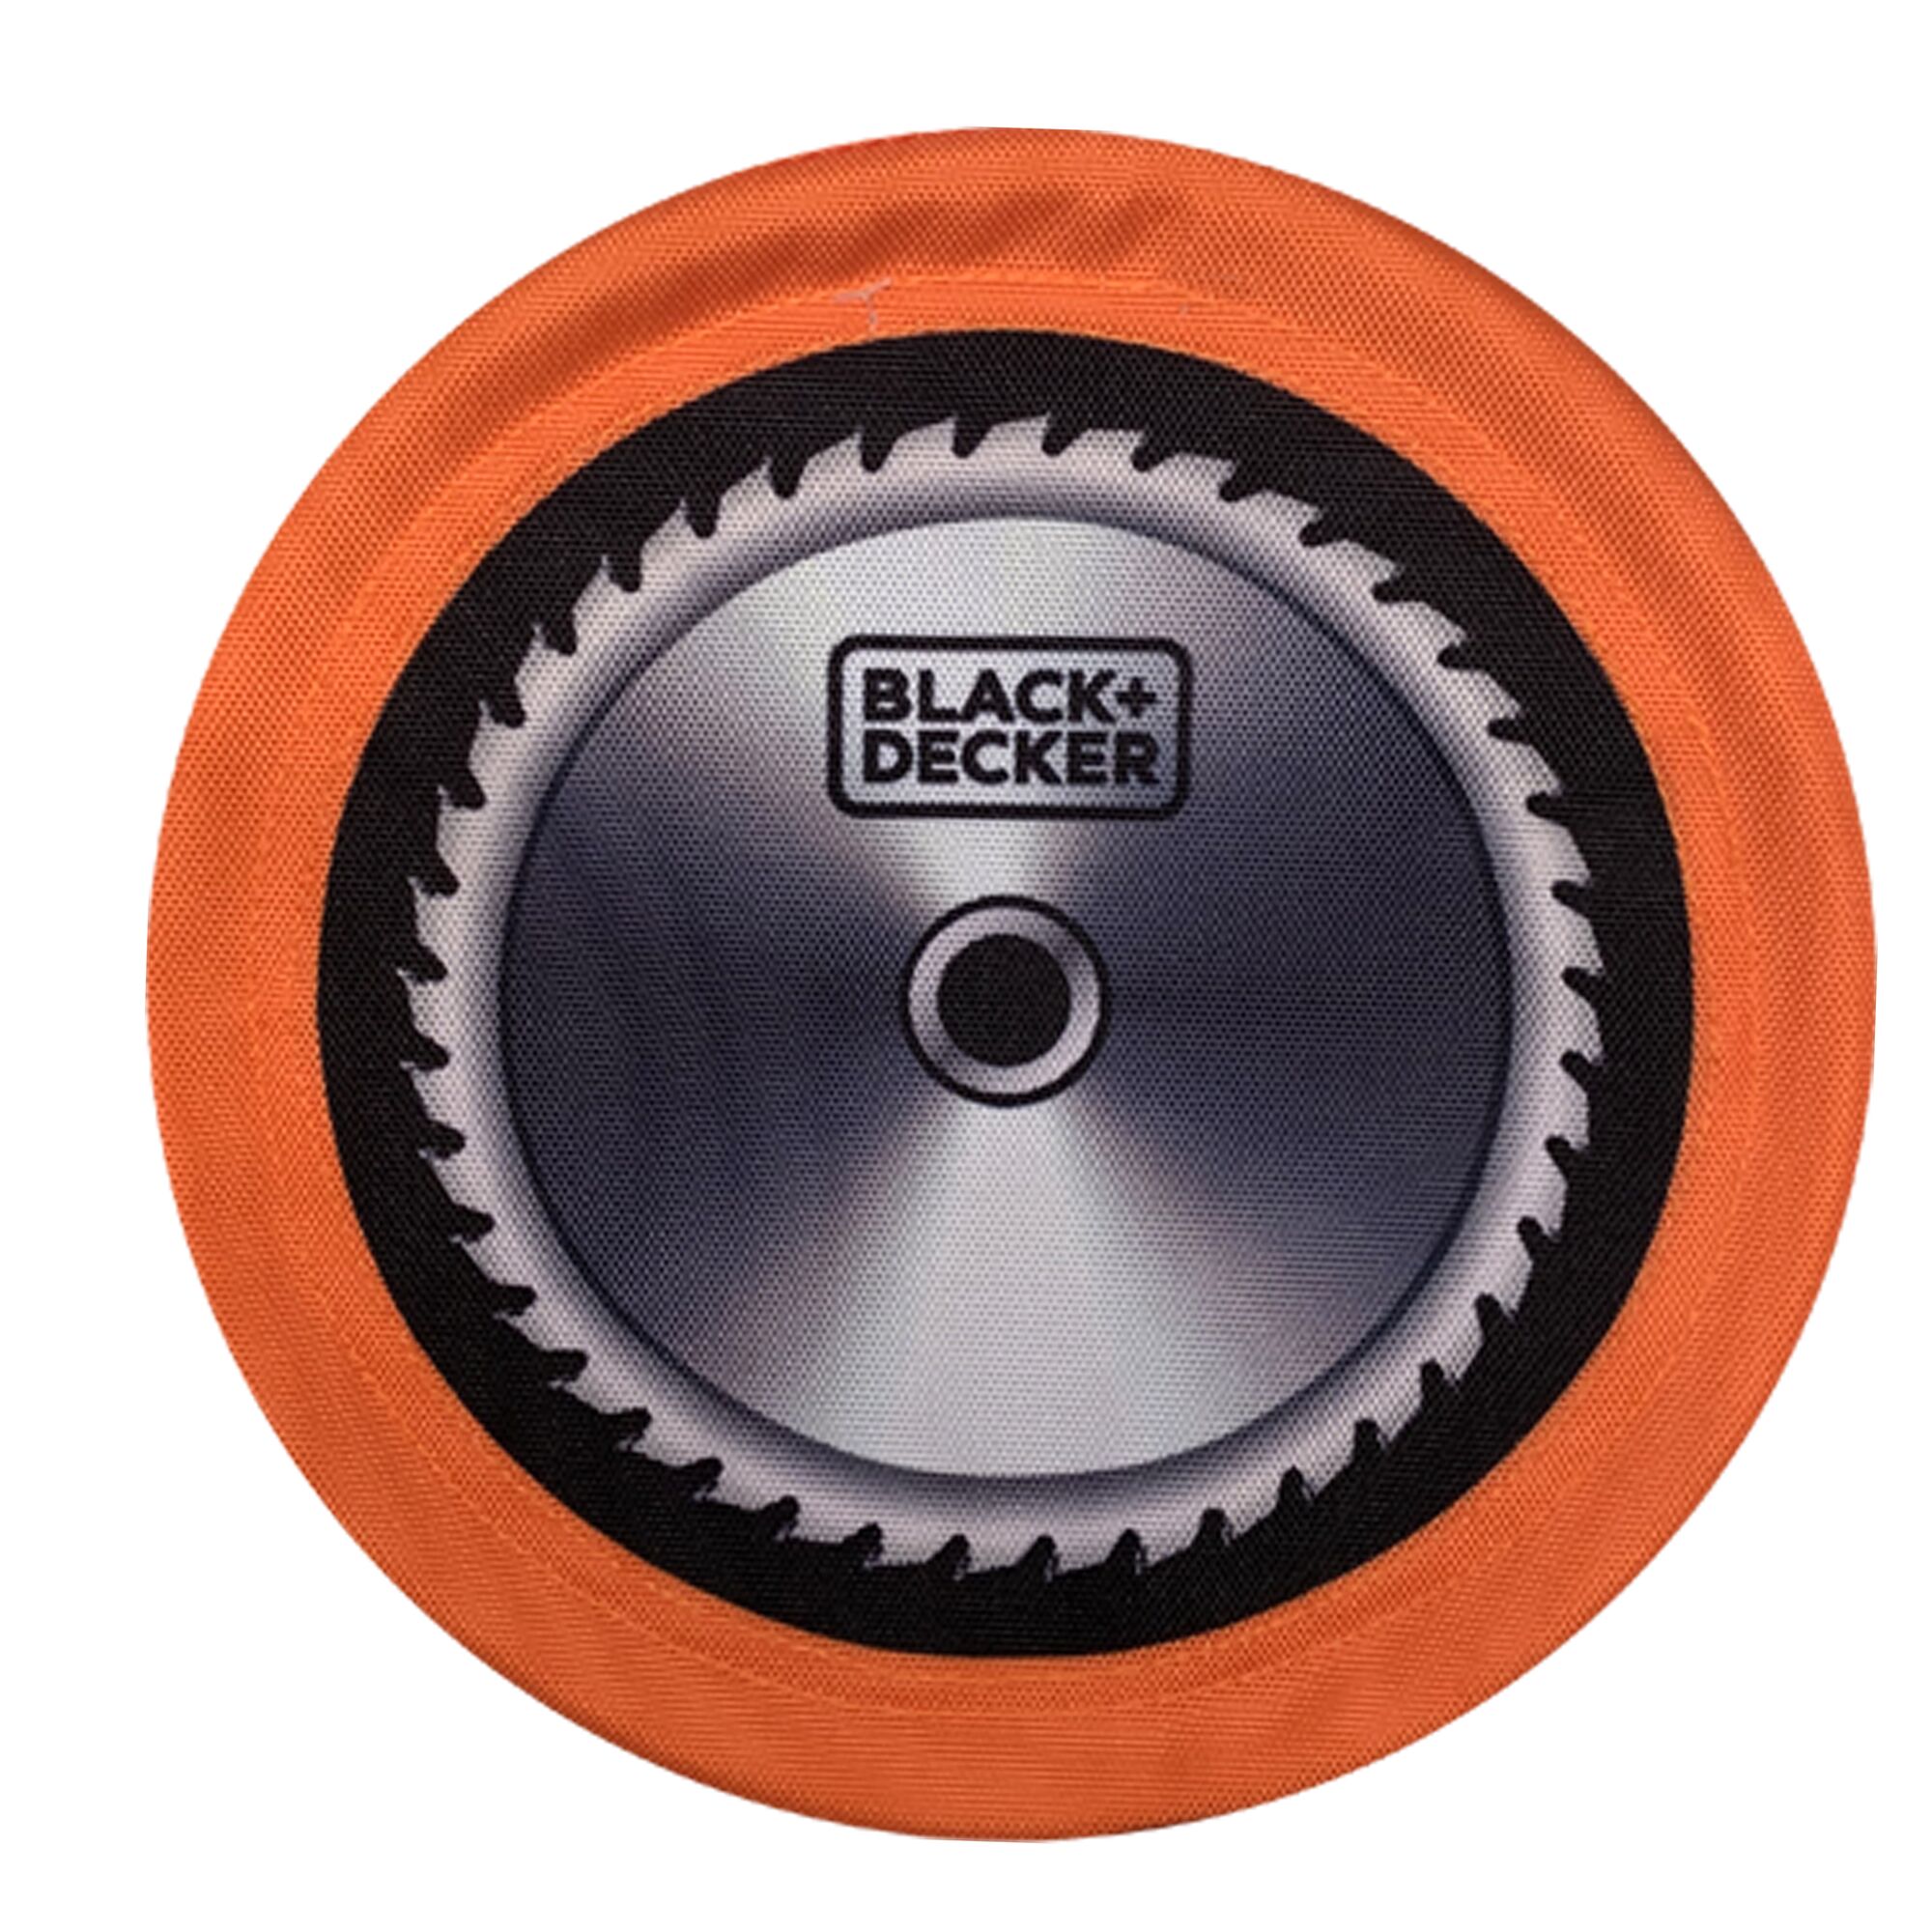 BLACK+DECKER orange and black colored dog toy in shape of a circular saw blade